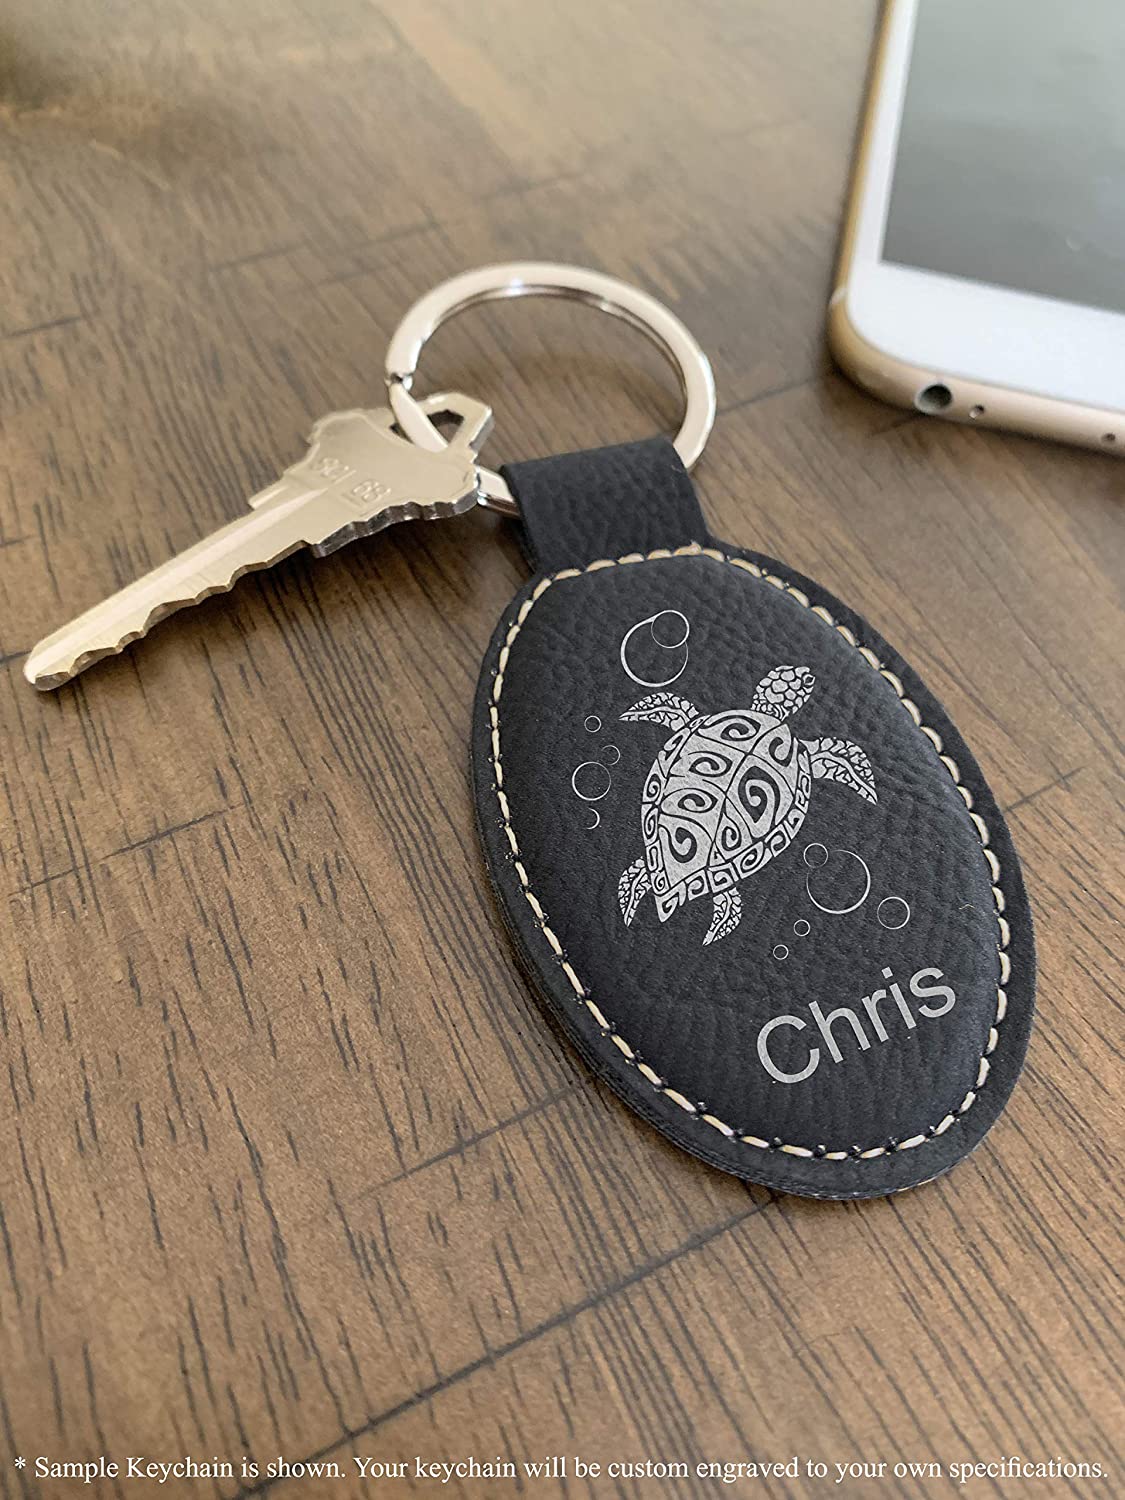 Faux Leather Oval Keychain, Bible Verse Philippians 4-13, Personalized Engraving Included